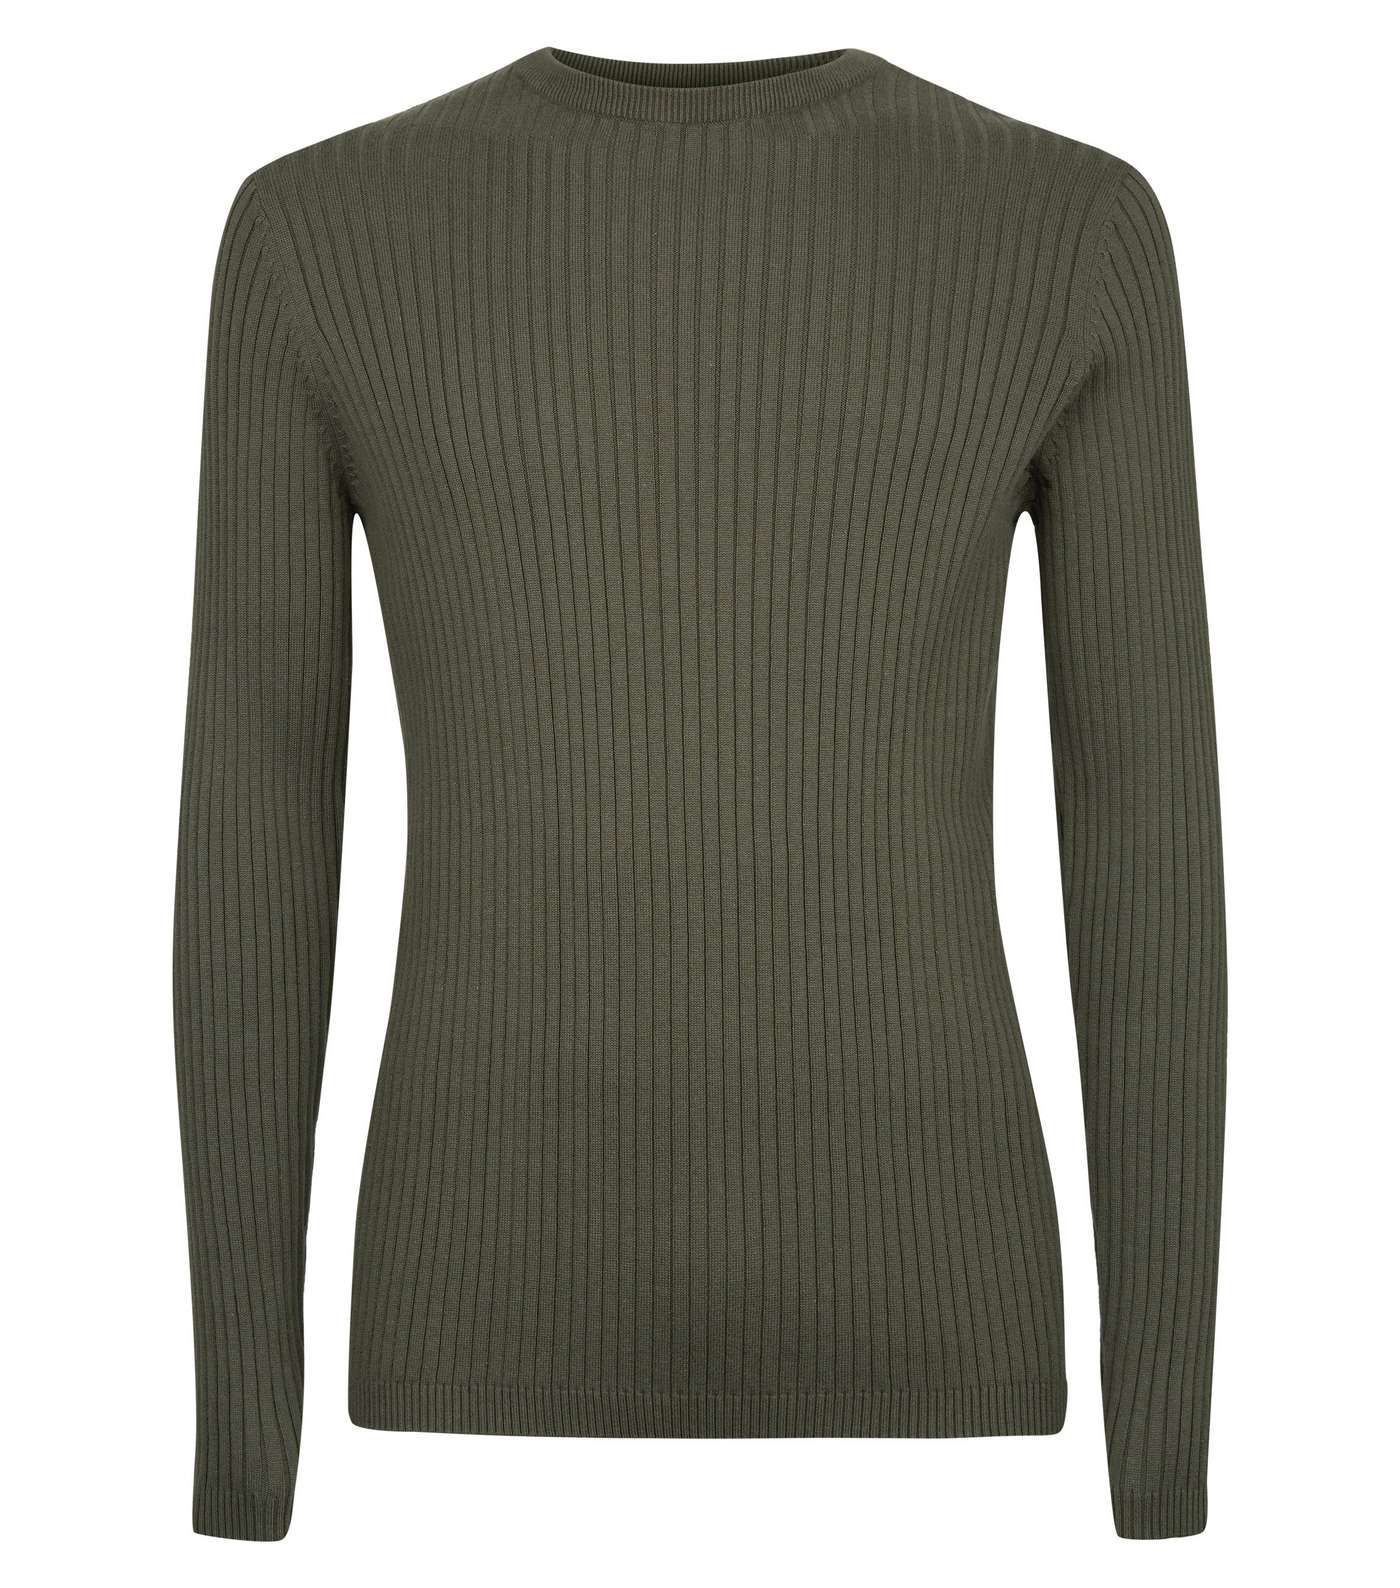 Khaki Ribbed Muscle Fit Jumper Image 4